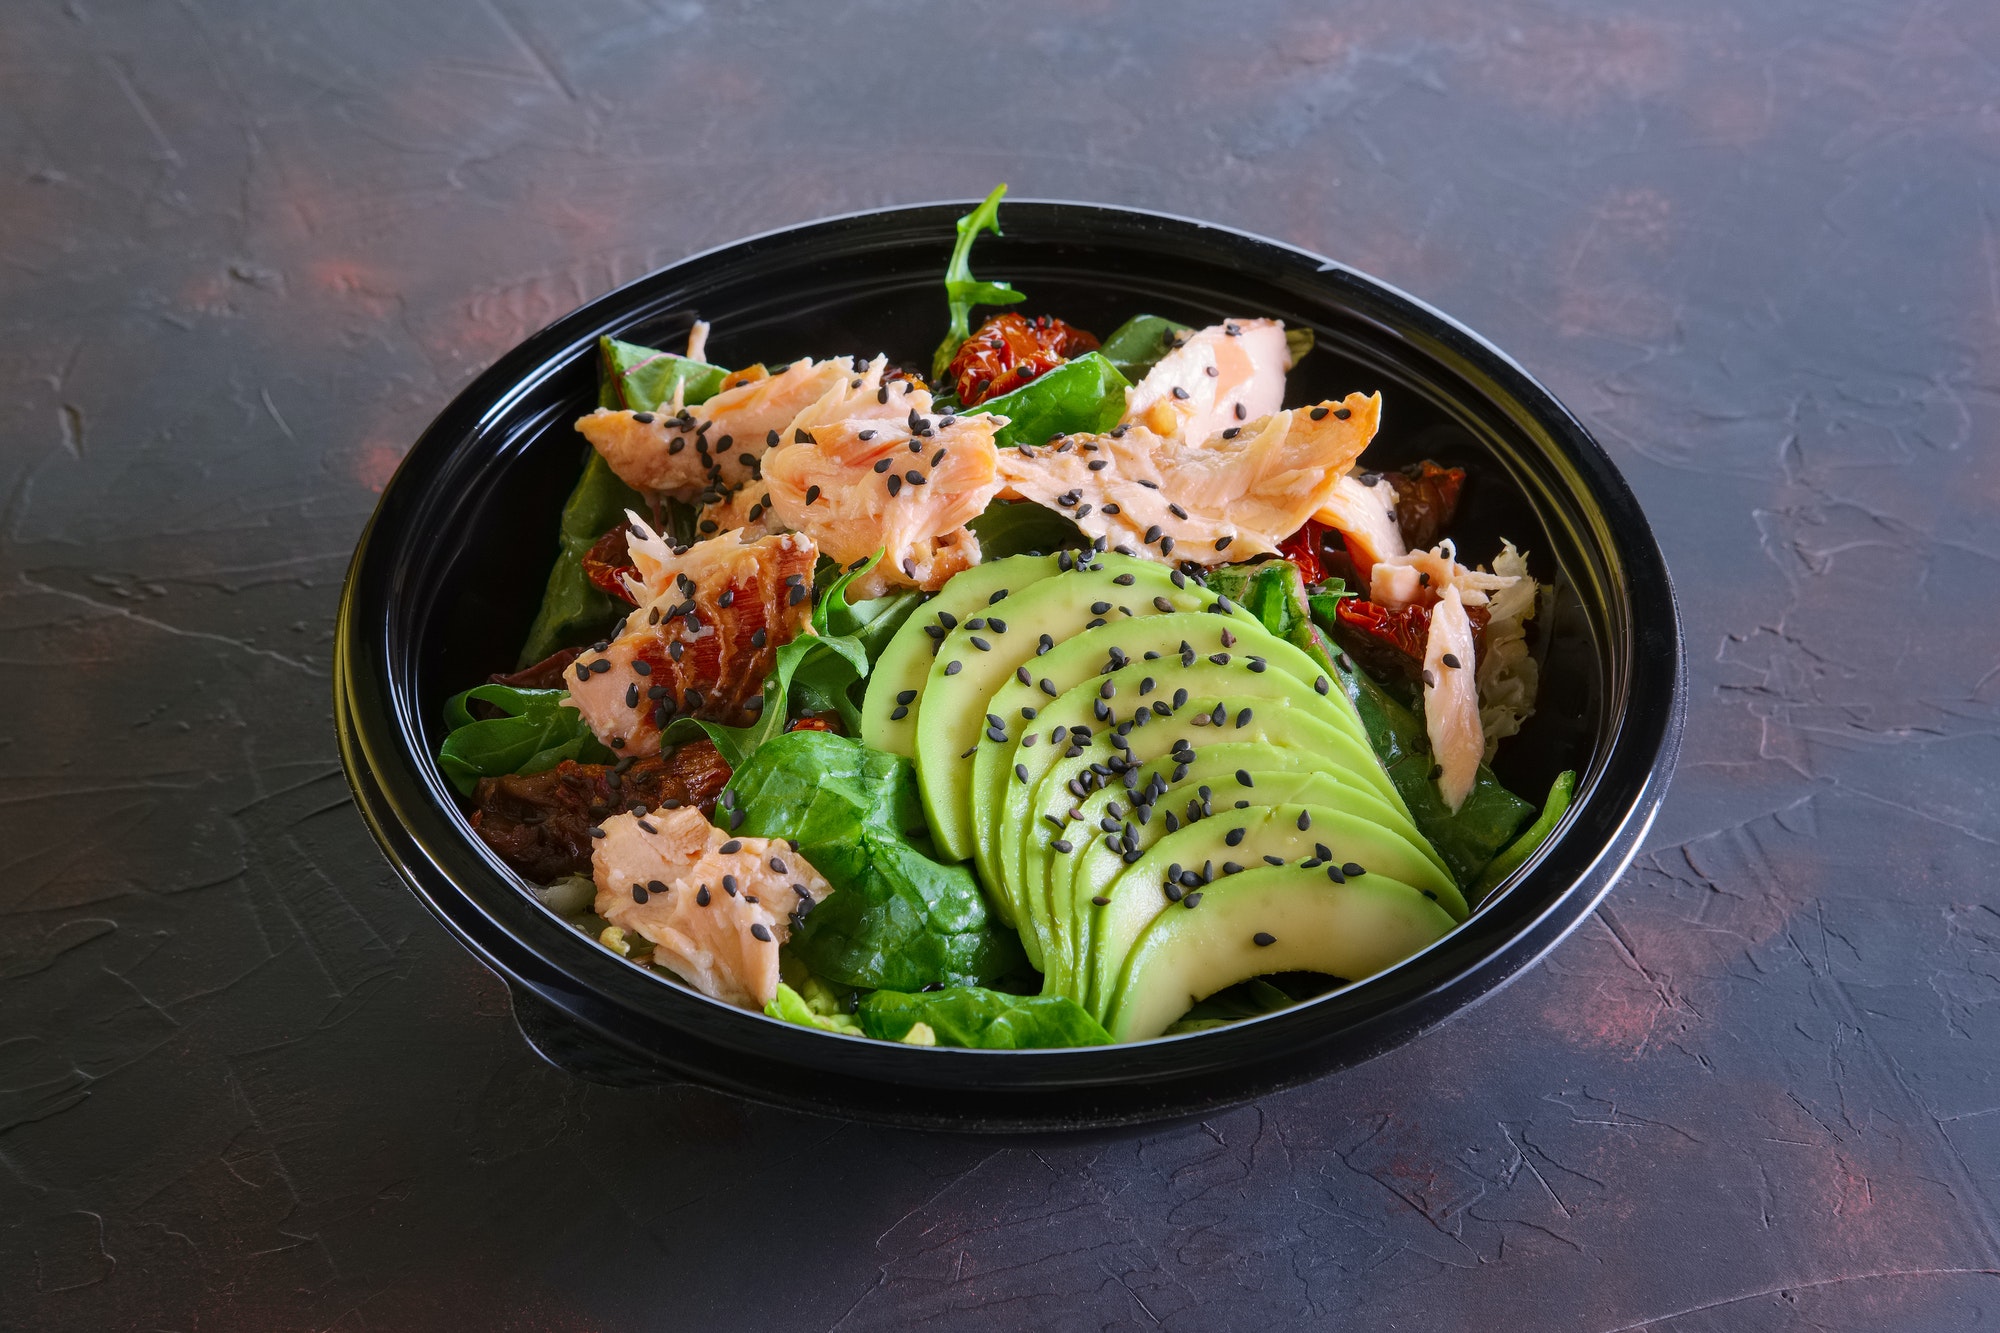 Salad with salmon, avocado and sun dried tomatoes in take away packaging